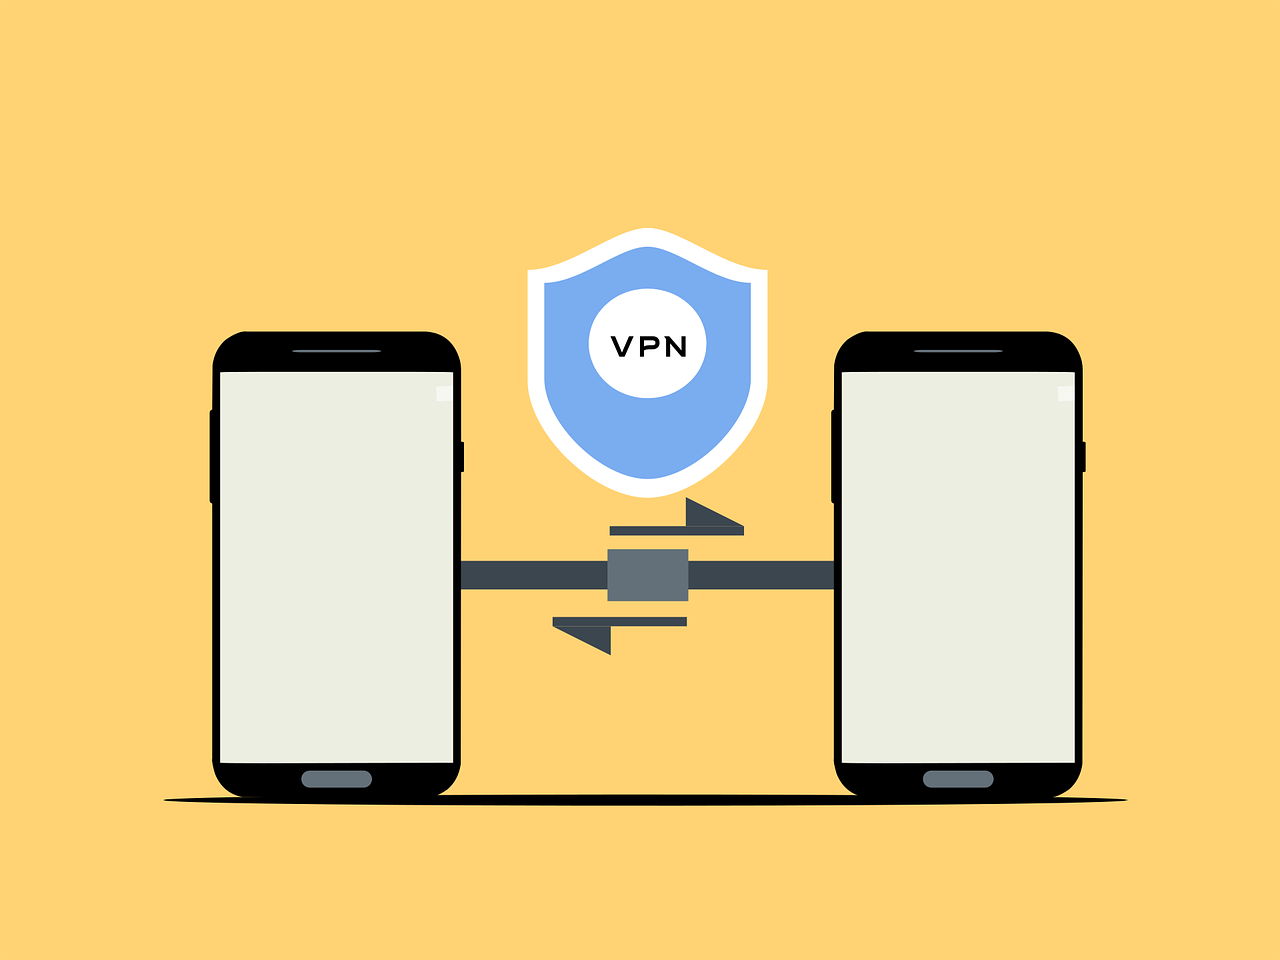 Benefits of Using a VPN for Online Privacy